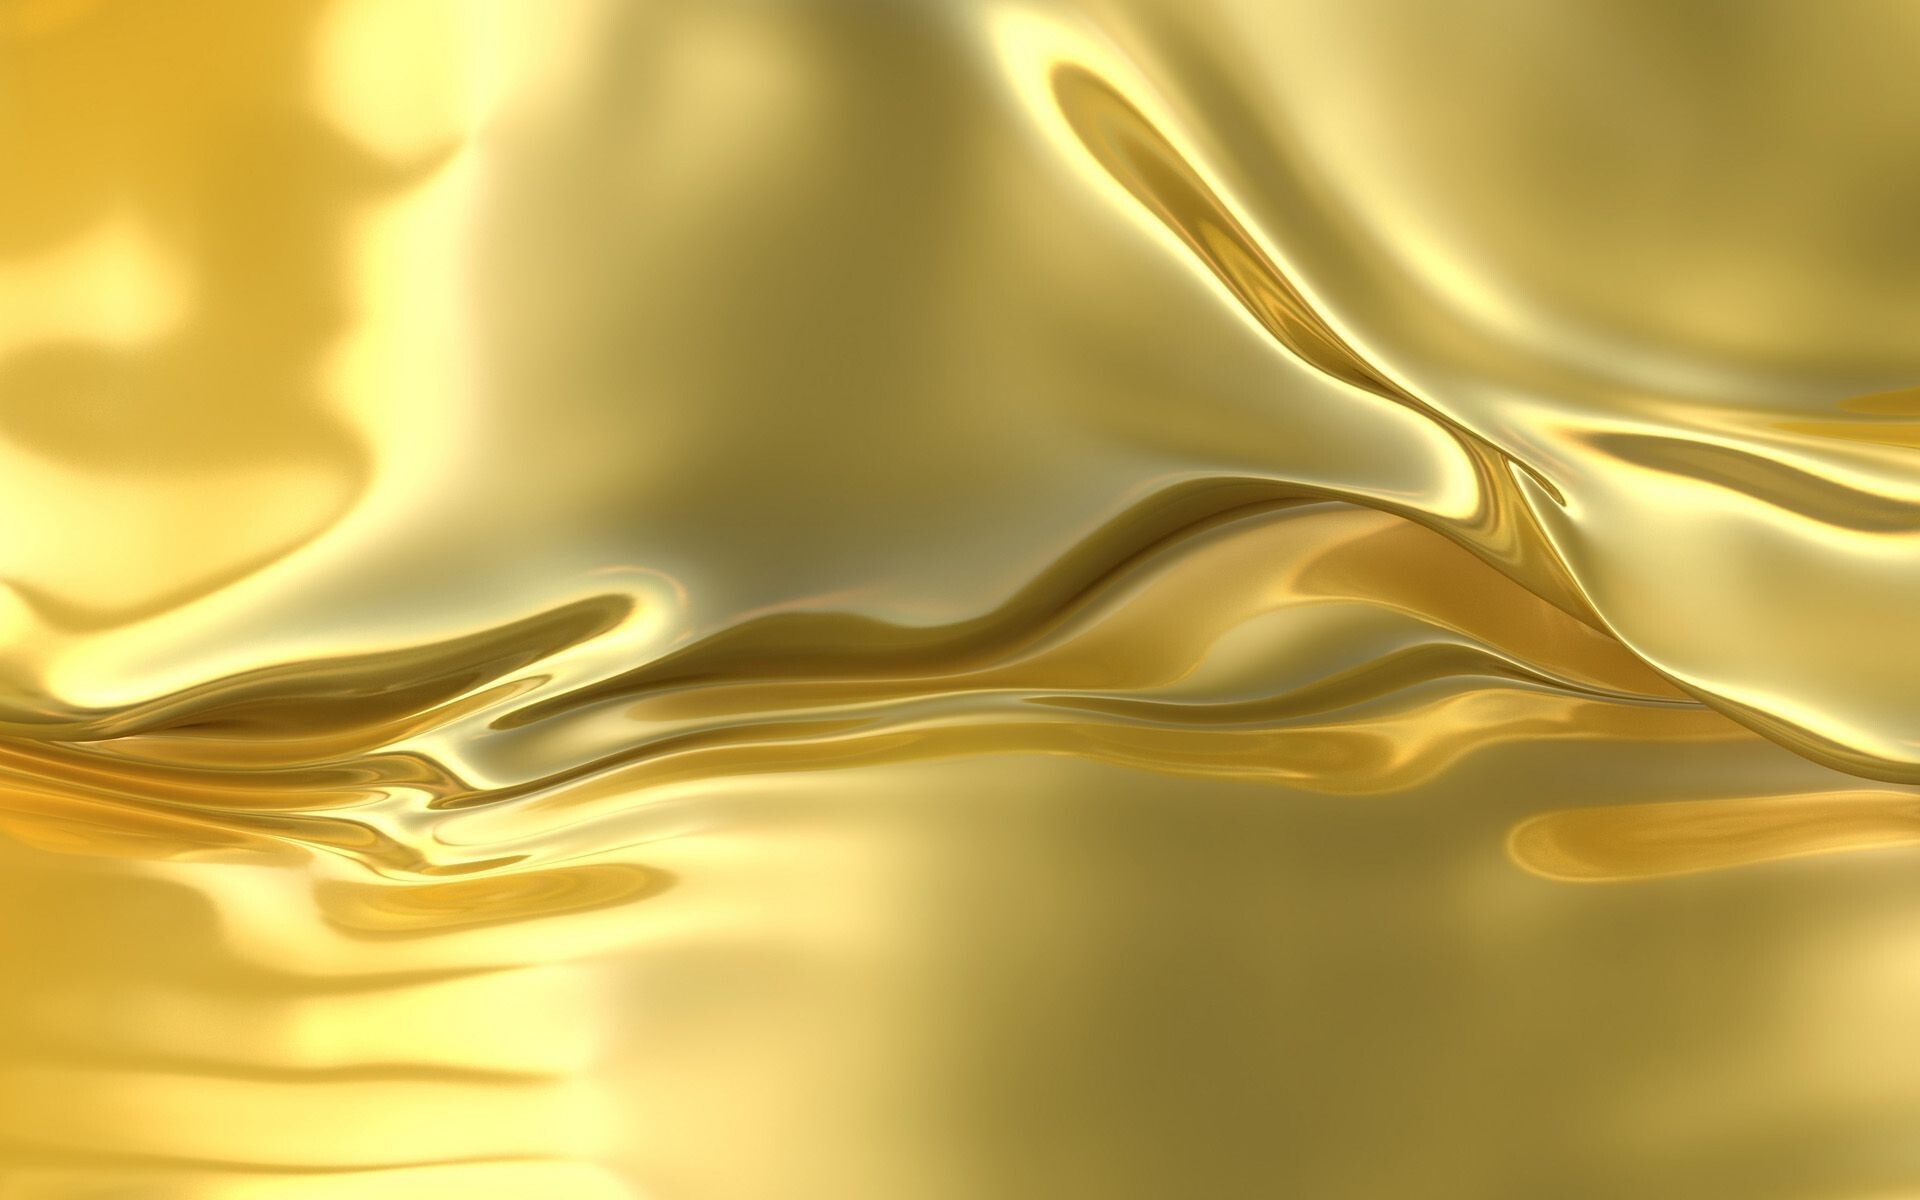 Gold Foil: The molted precious chemical element, Soft, malleable, and ductile metal in a pure form. 1920x1200 HD Background.